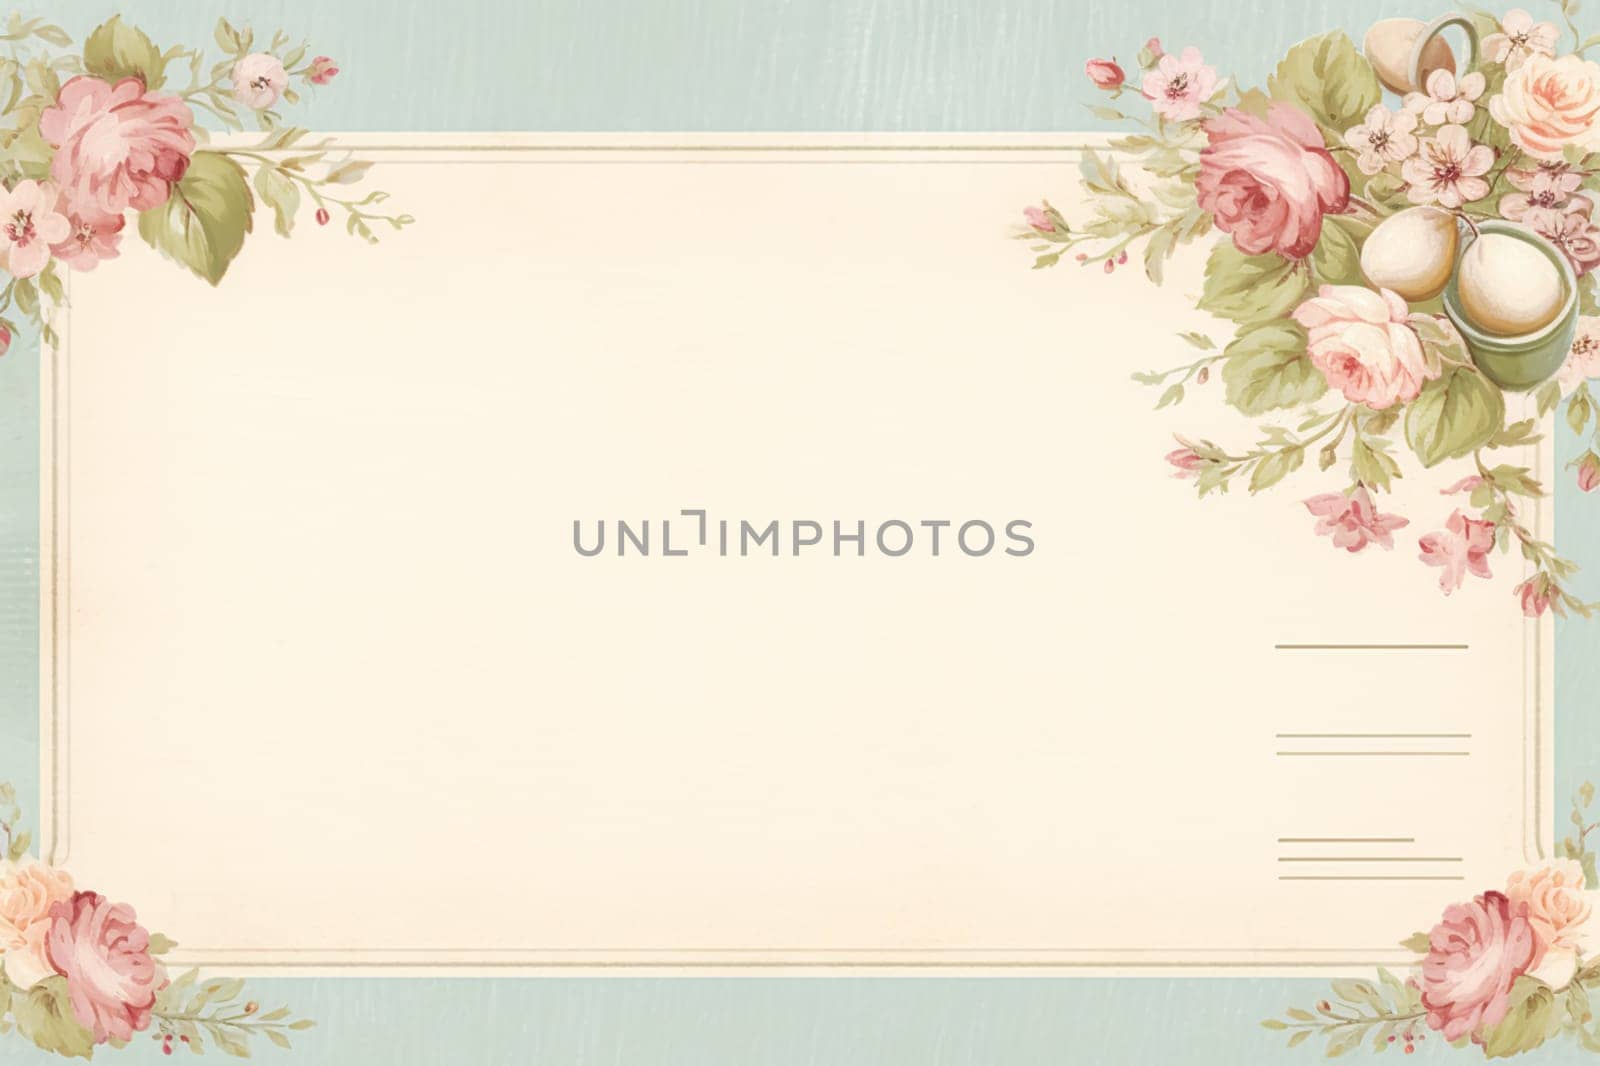 Blank vintage floral lined paper recipe card background for printable digital paper, art stationery and greeting card illustration idea